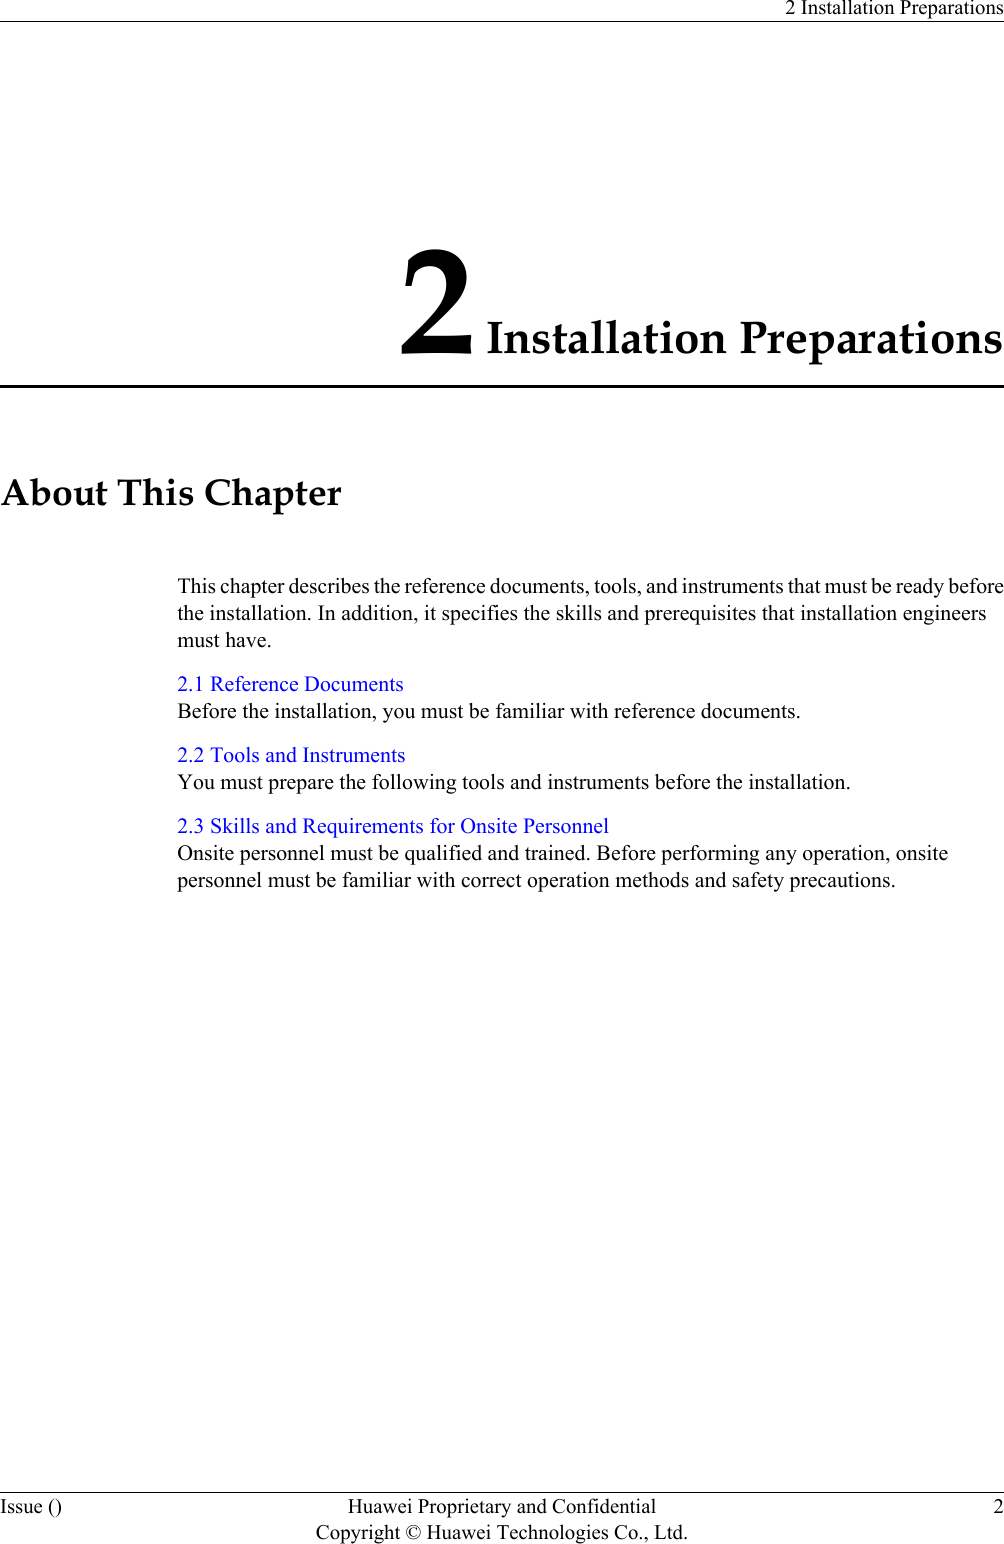 2 Installation PreparationsAbout This ChapterThis chapter describes the reference documents, tools, and instruments that must be ready beforethe installation. In addition, it specifies the skills and prerequisites that installation engineersmust have.2.1 Reference DocumentsBefore the installation, you must be familiar with reference documents.2.2 Tools and InstrumentsYou must prepare the following tools and instruments before the installation.2.3 Skills and Requirements for Onsite PersonnelOnsite personnel must be qualified and trained. Before performing any operation, onsitepersonnel must be familiar with correct operation methods and safety precautions.2 Installation PreparationsIssue () Huawei Proprietary and ConfidentialCopyright © Huawei Technologies Co., Ltd.2